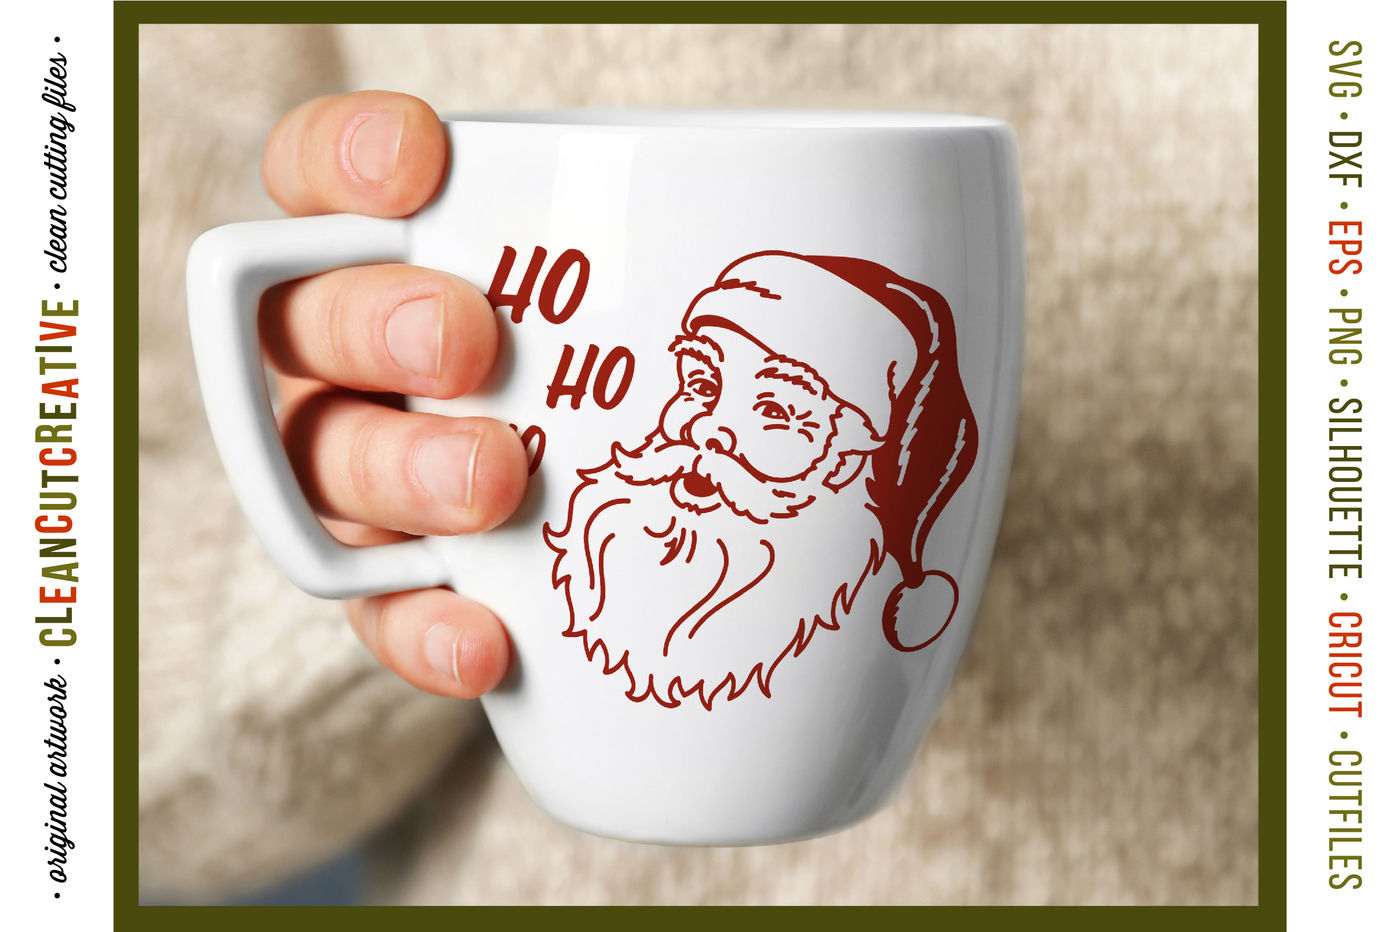 ori 100536 91c694fa337894aa0921d7b39f15354fabd11e68 ho ho ho old school santa svg dxf eps png cricut and silhouette clean cutting files